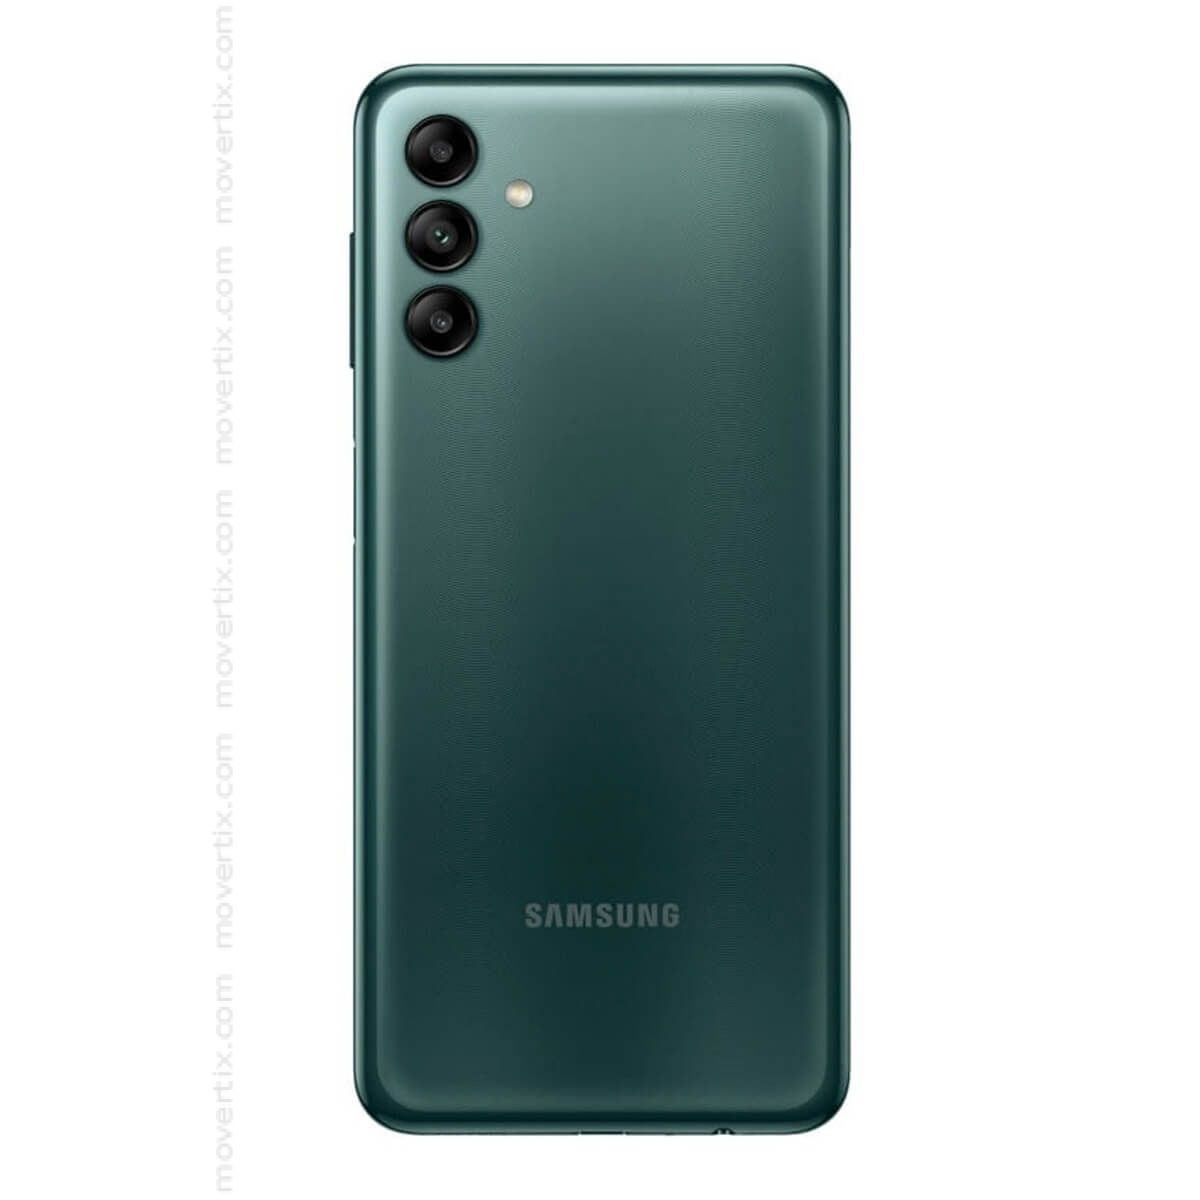 Gensidig to uger dok Samsung Galaxy A04s Dual SIM Green 32GB and 3GB RAM - SM-A047F/DS  (8806094581911) | Movertix Mobile Phones Shop